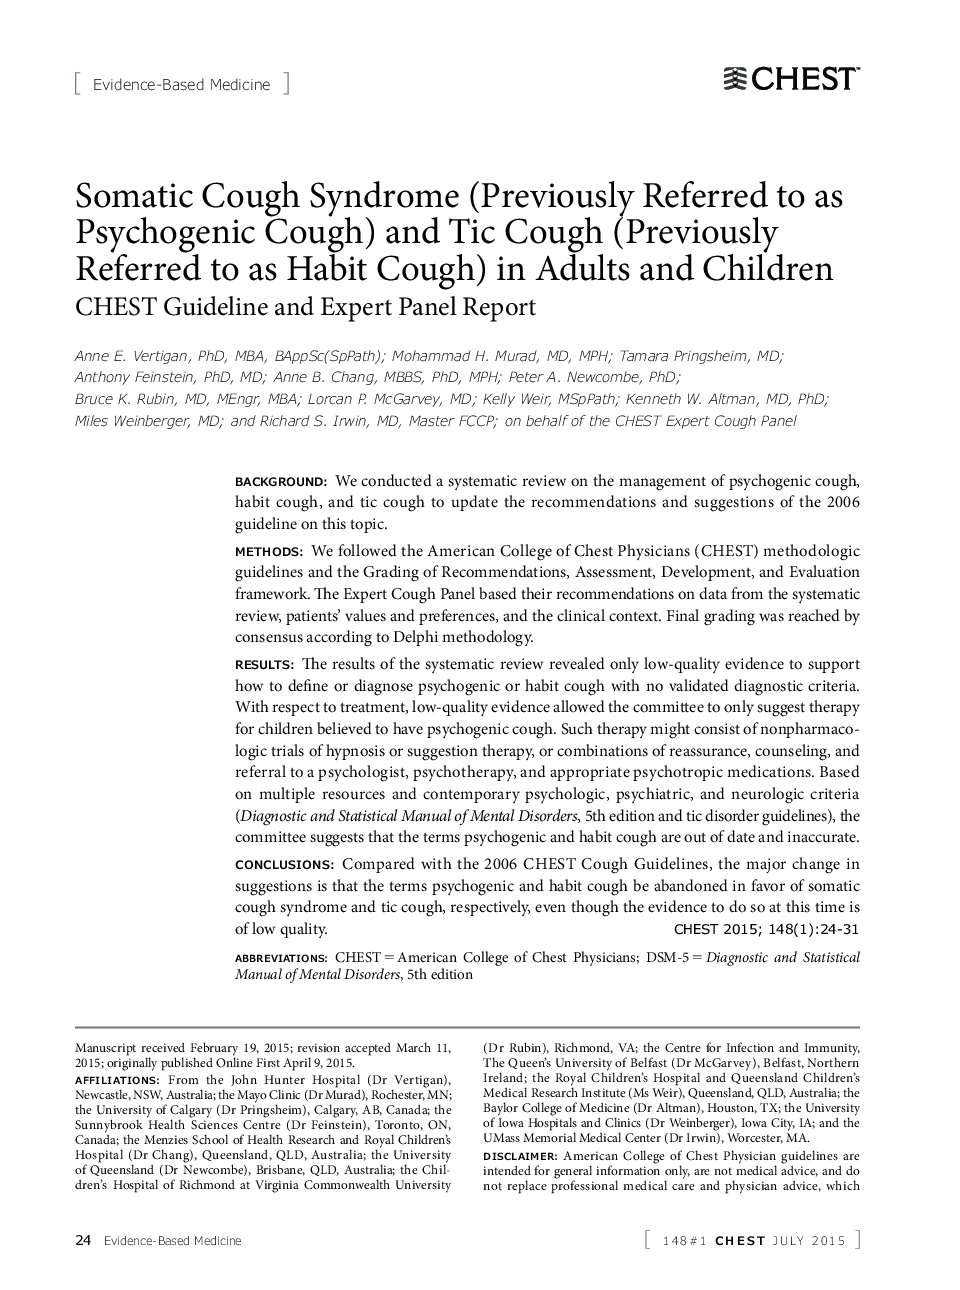 Somatic Cough Syndrome (Previously Referred to as Psychogenic Cough) and Tic Cough (Previously Referred to as Habit Cough) in Adults and Children